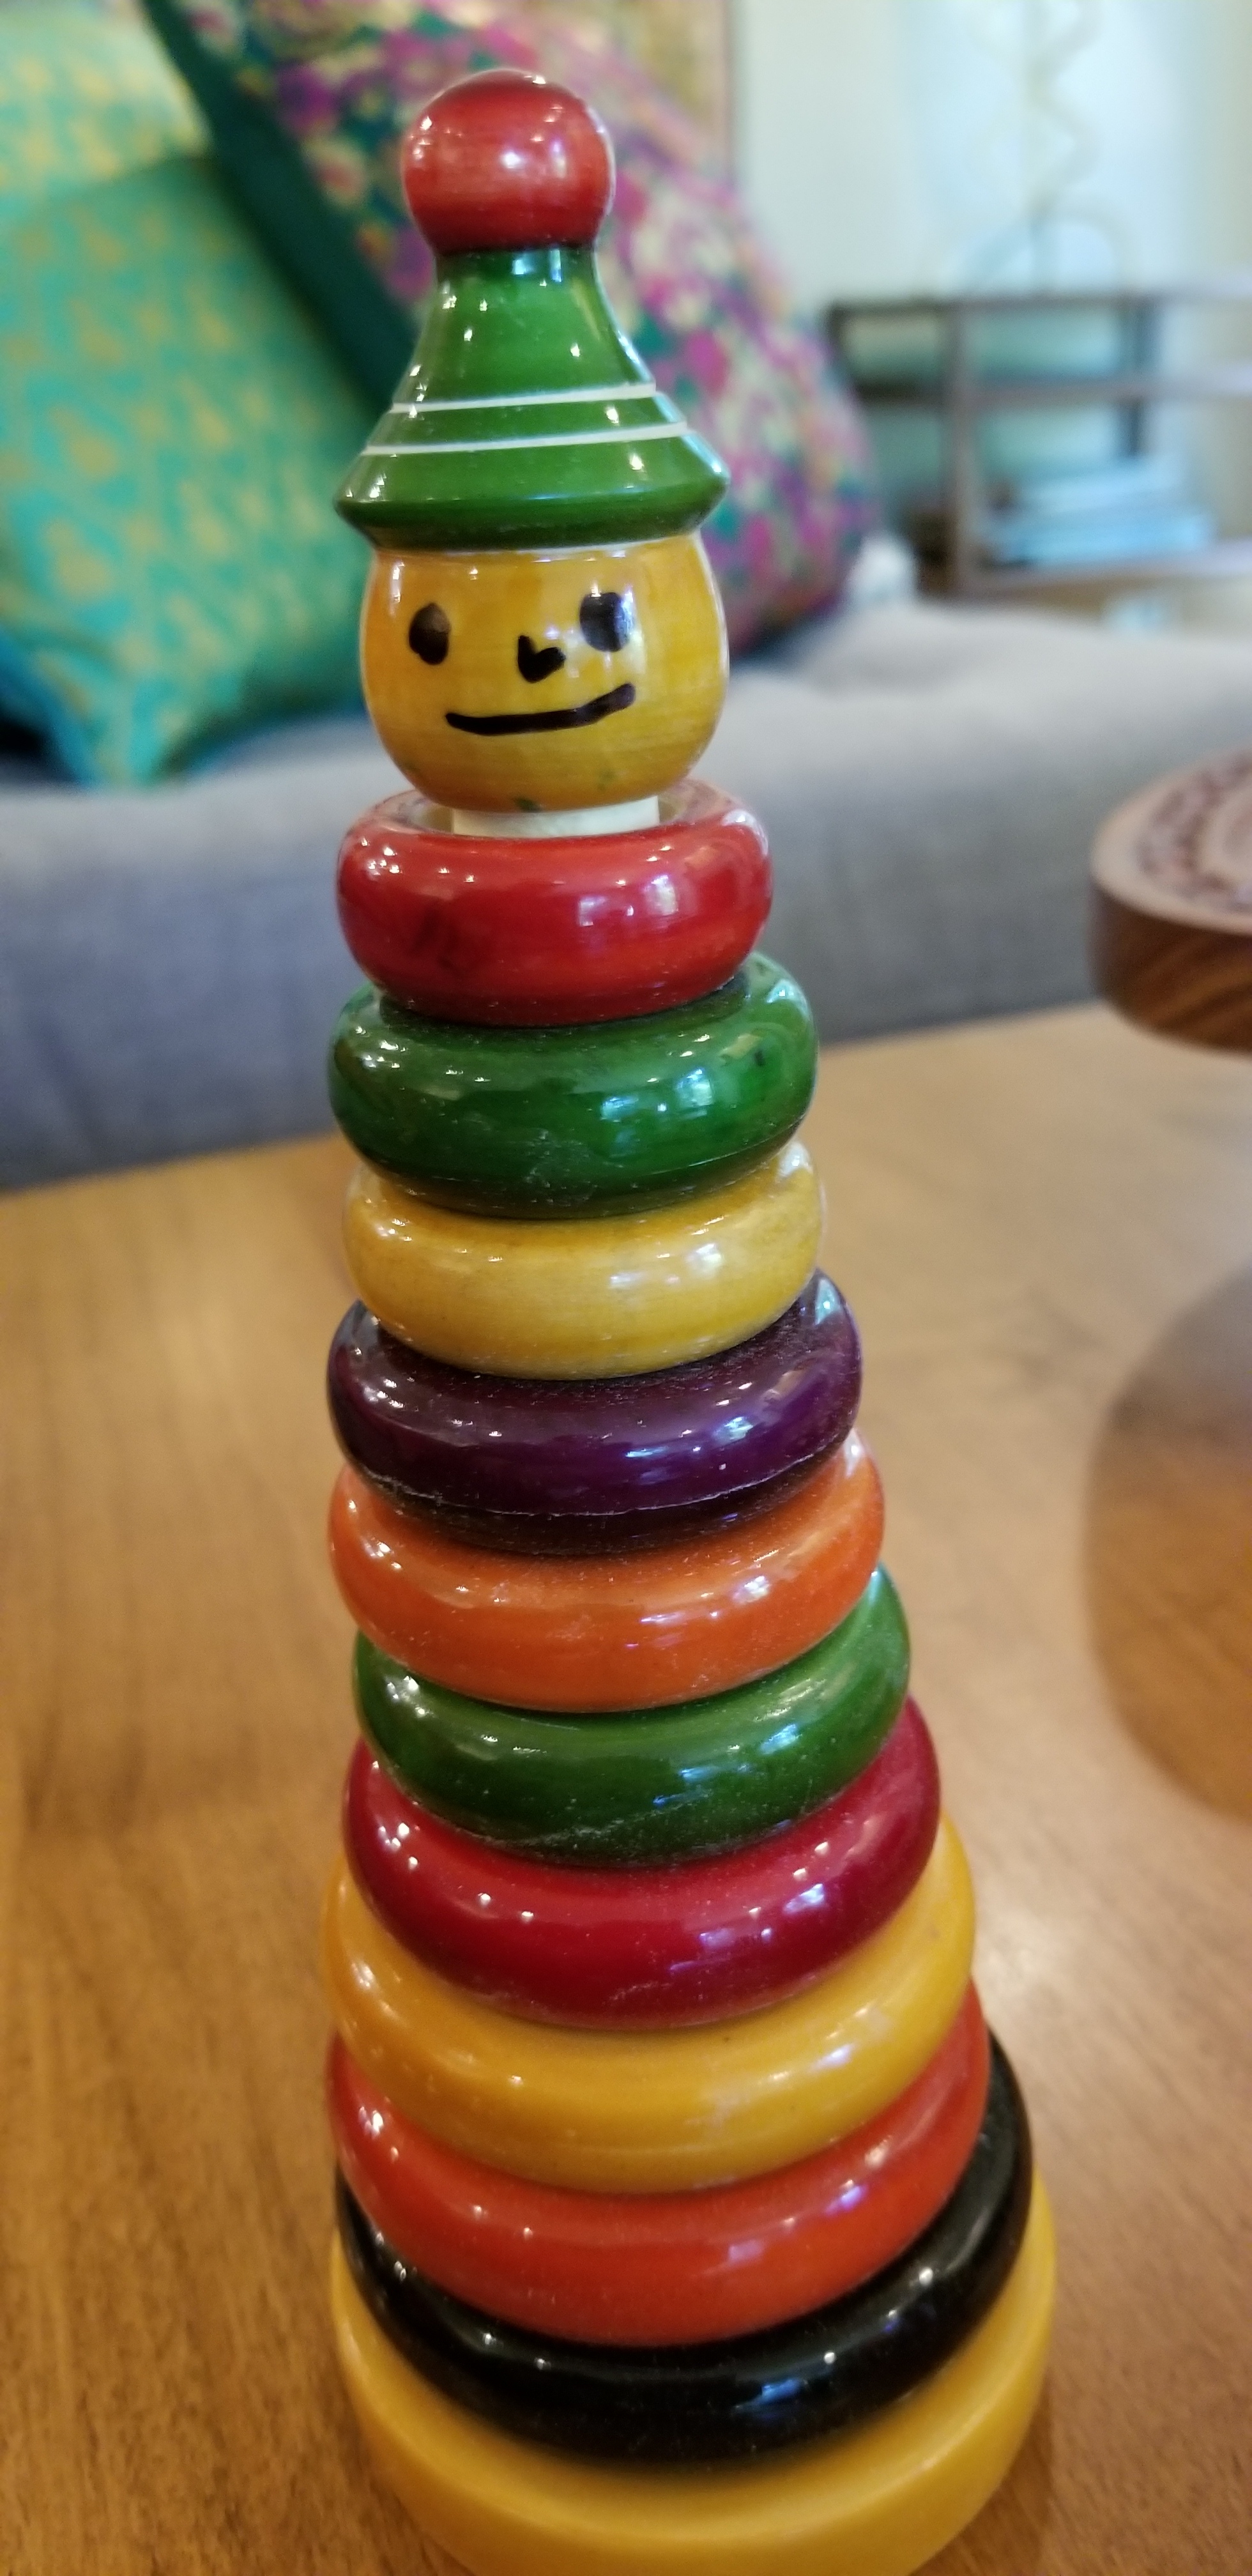 Hand-carved wooden stacking toy